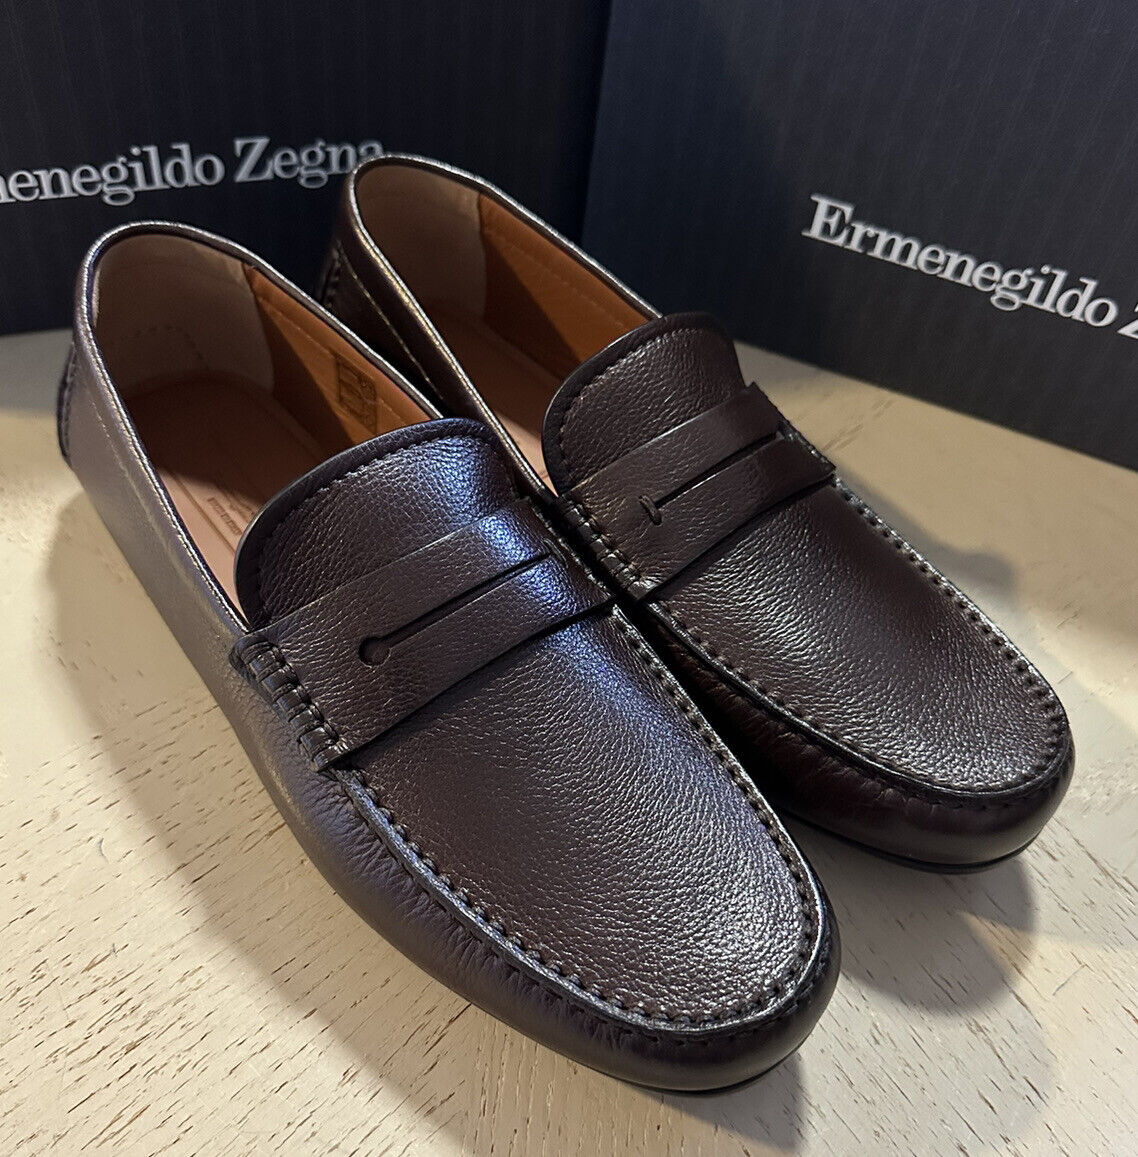 New $660 Ermenegildo Zegna Leather Driver Loafers Shoes Brown 10.5 US